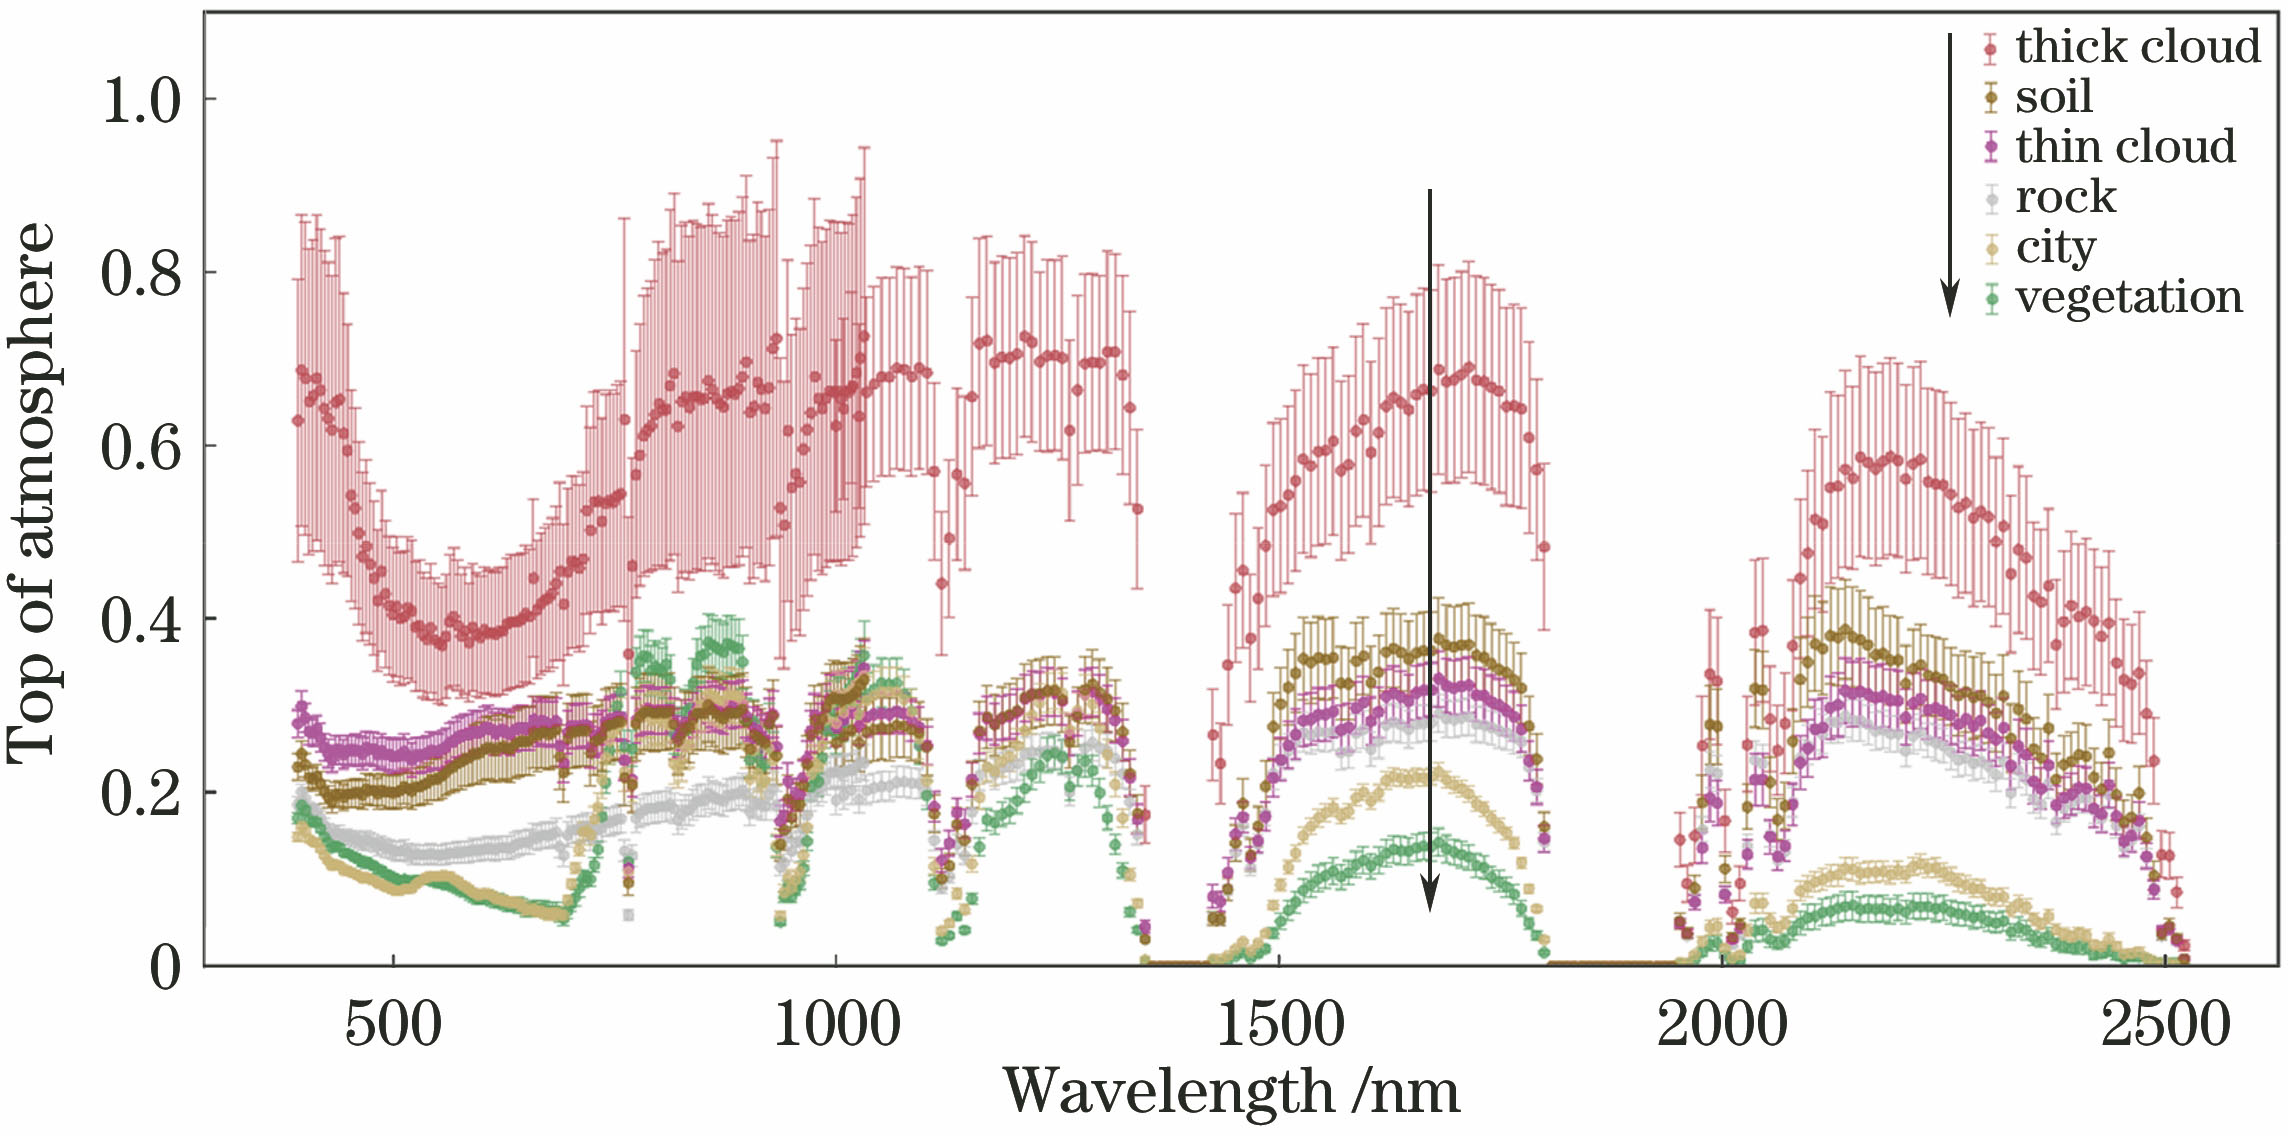 Apparent reflectance curves of different ground objects in AHSI hyperspectral image (the averages are shown as solid dots, and the error bars correspond to the standard deviations)